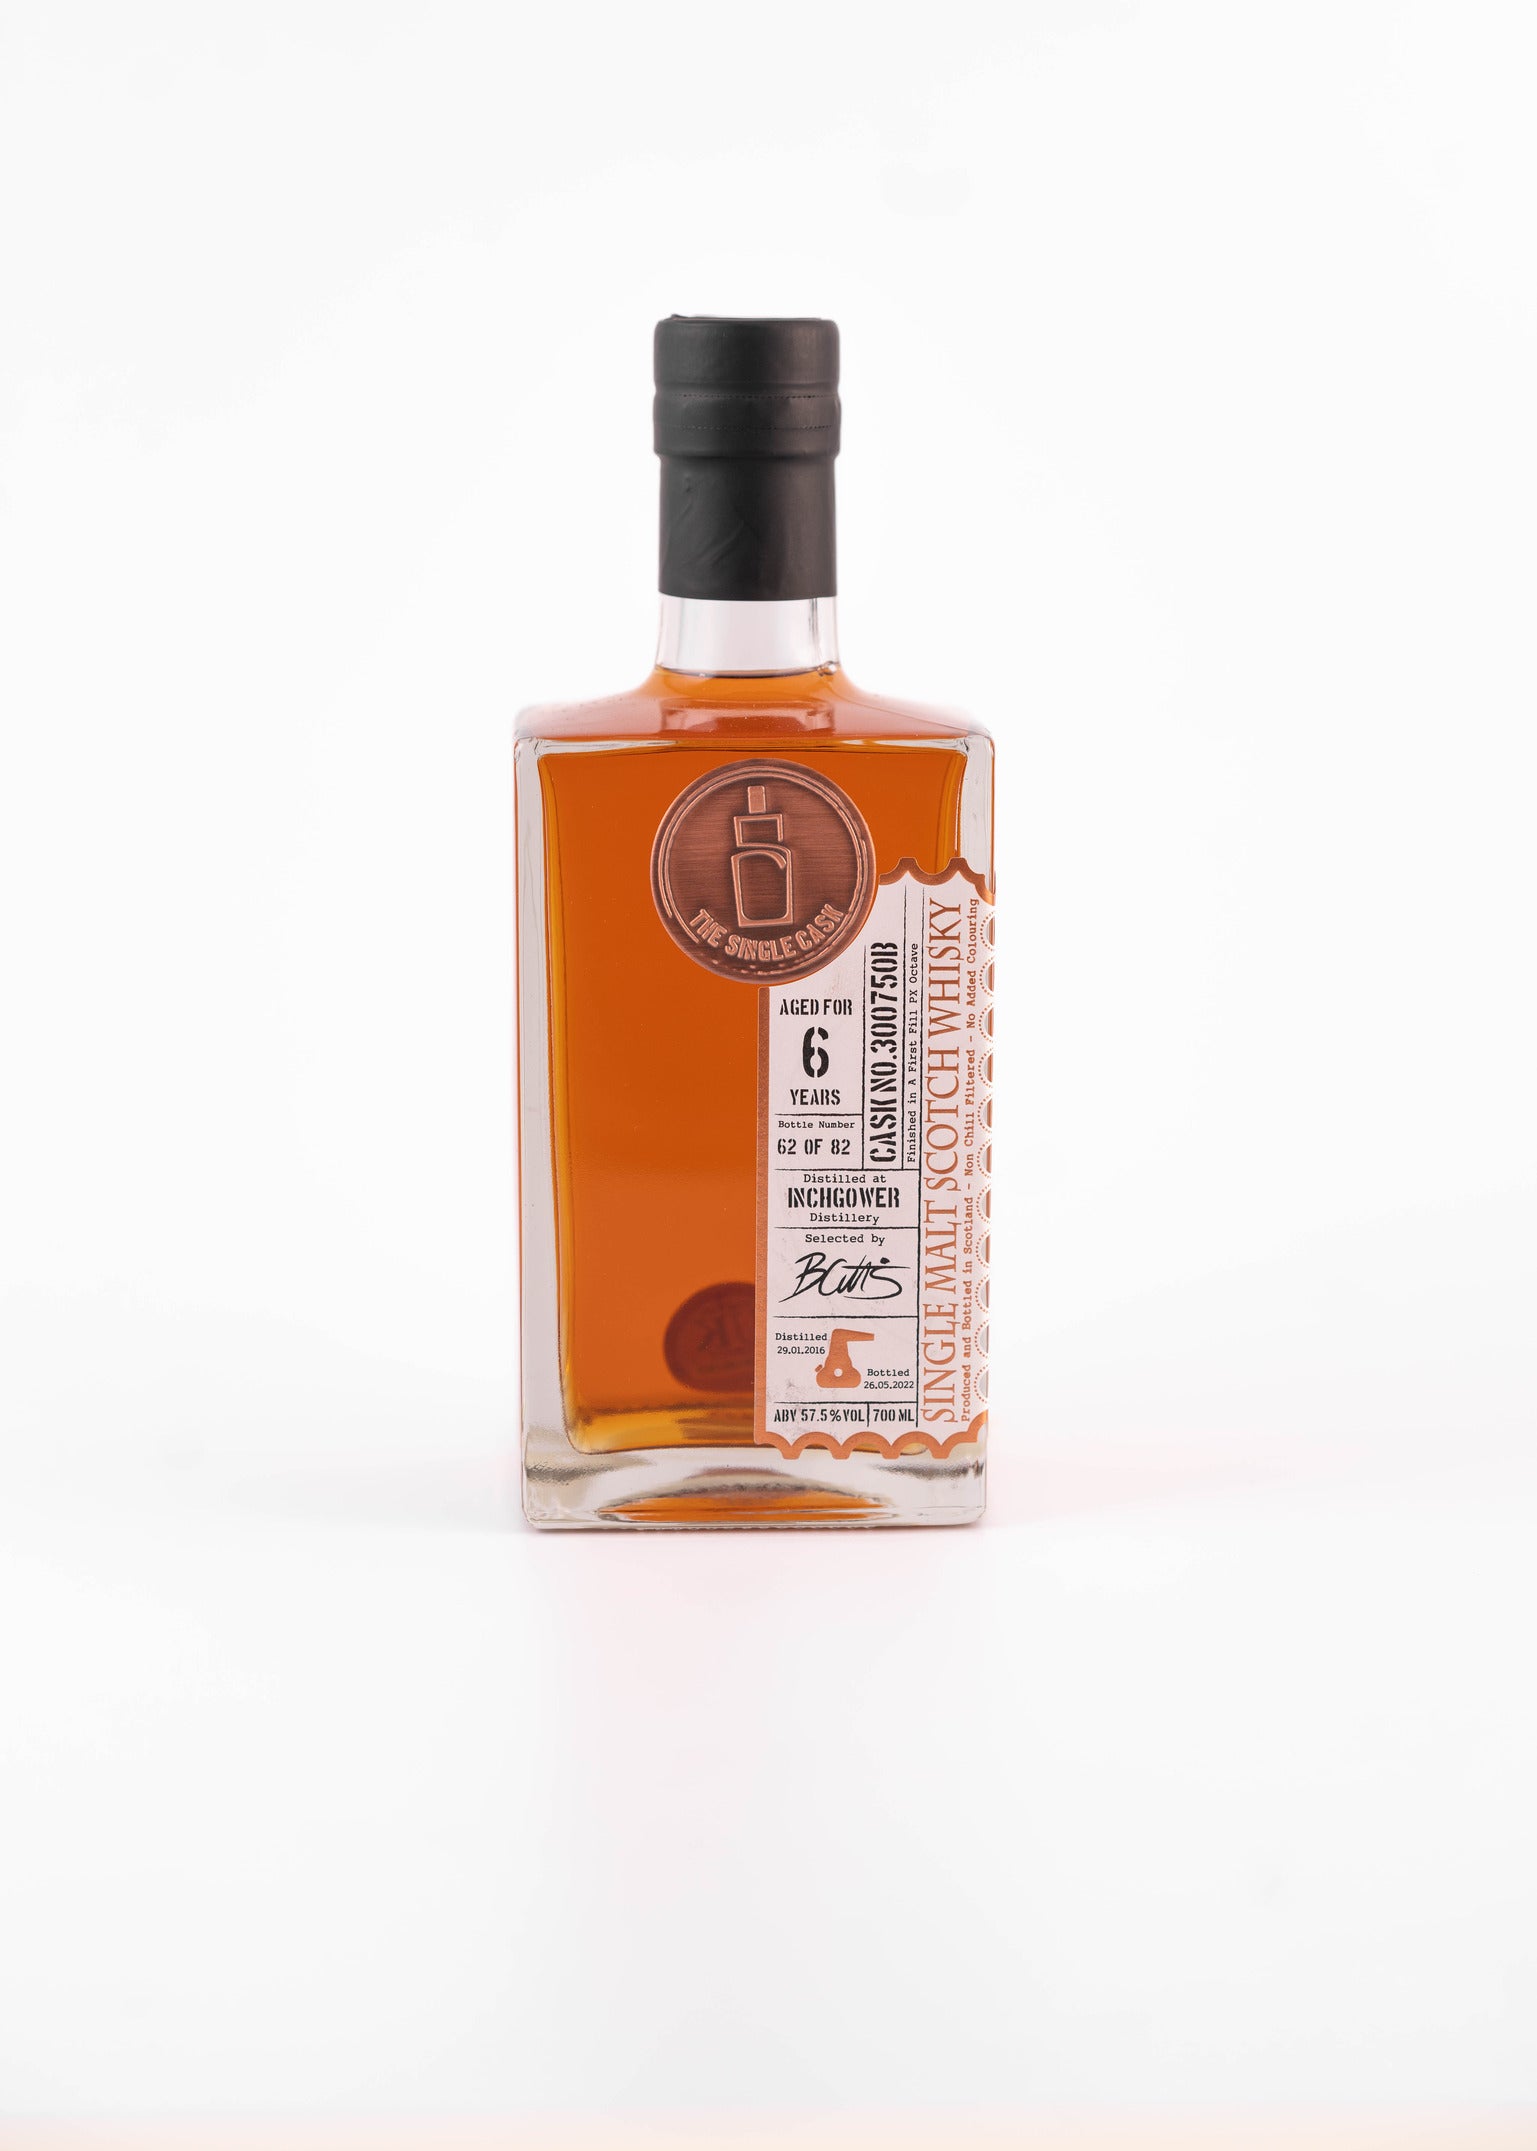 Inchgower 6 years old single cask scotch whisky